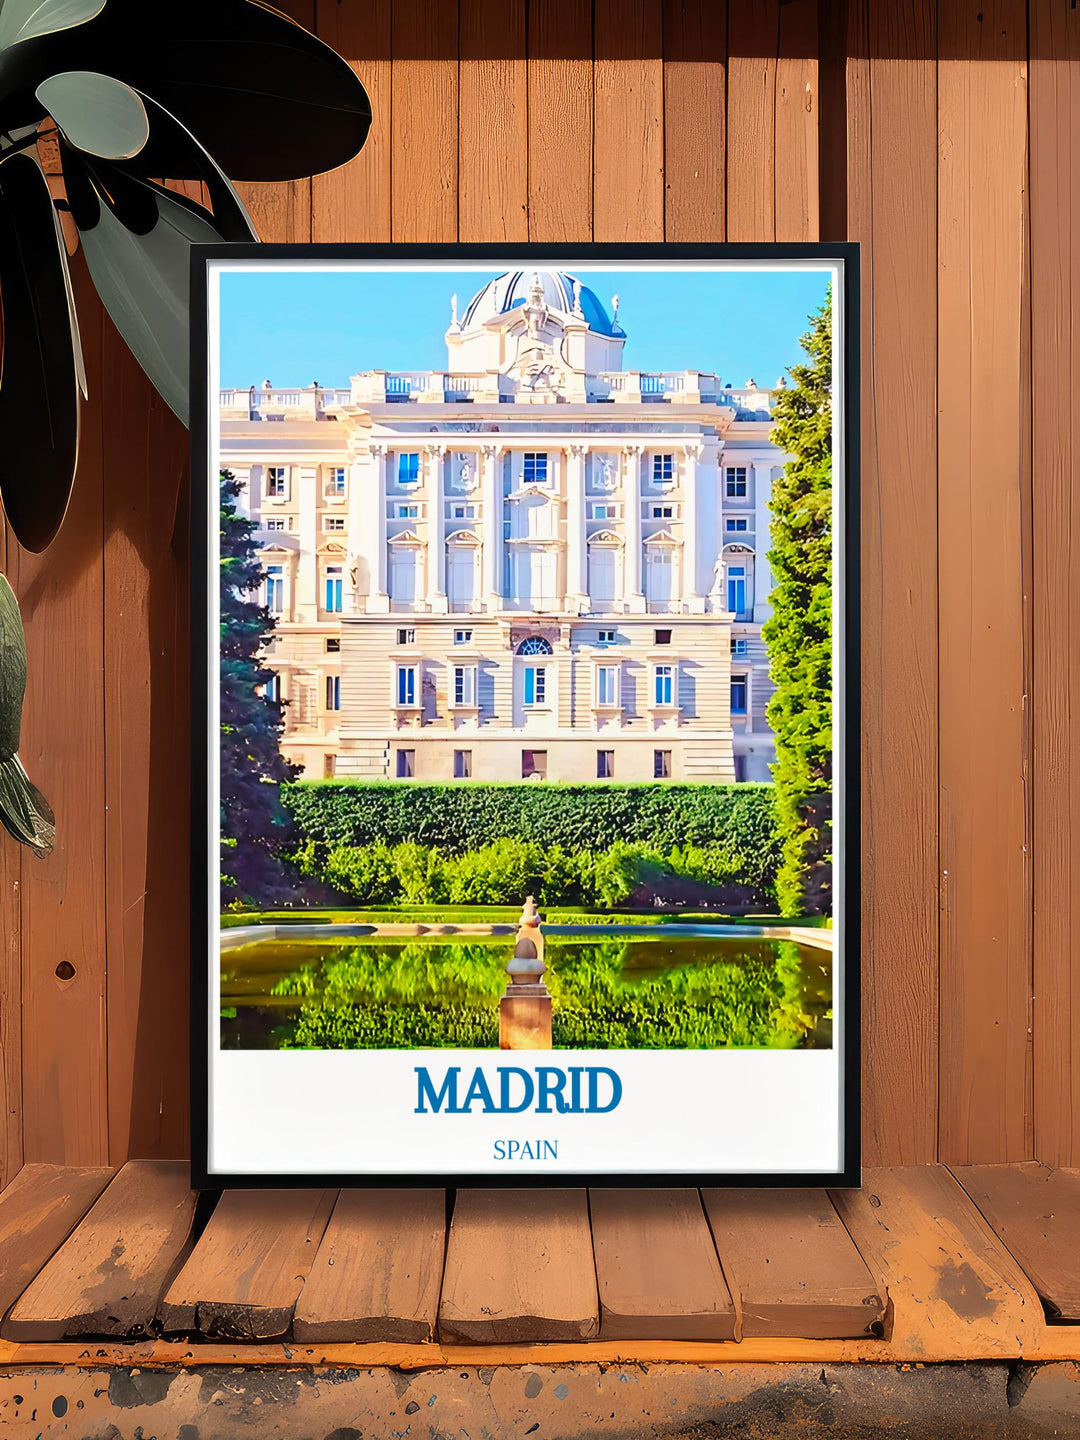 Custom print of the Palacio Real, tailored to bring regal beauty into your home décor.